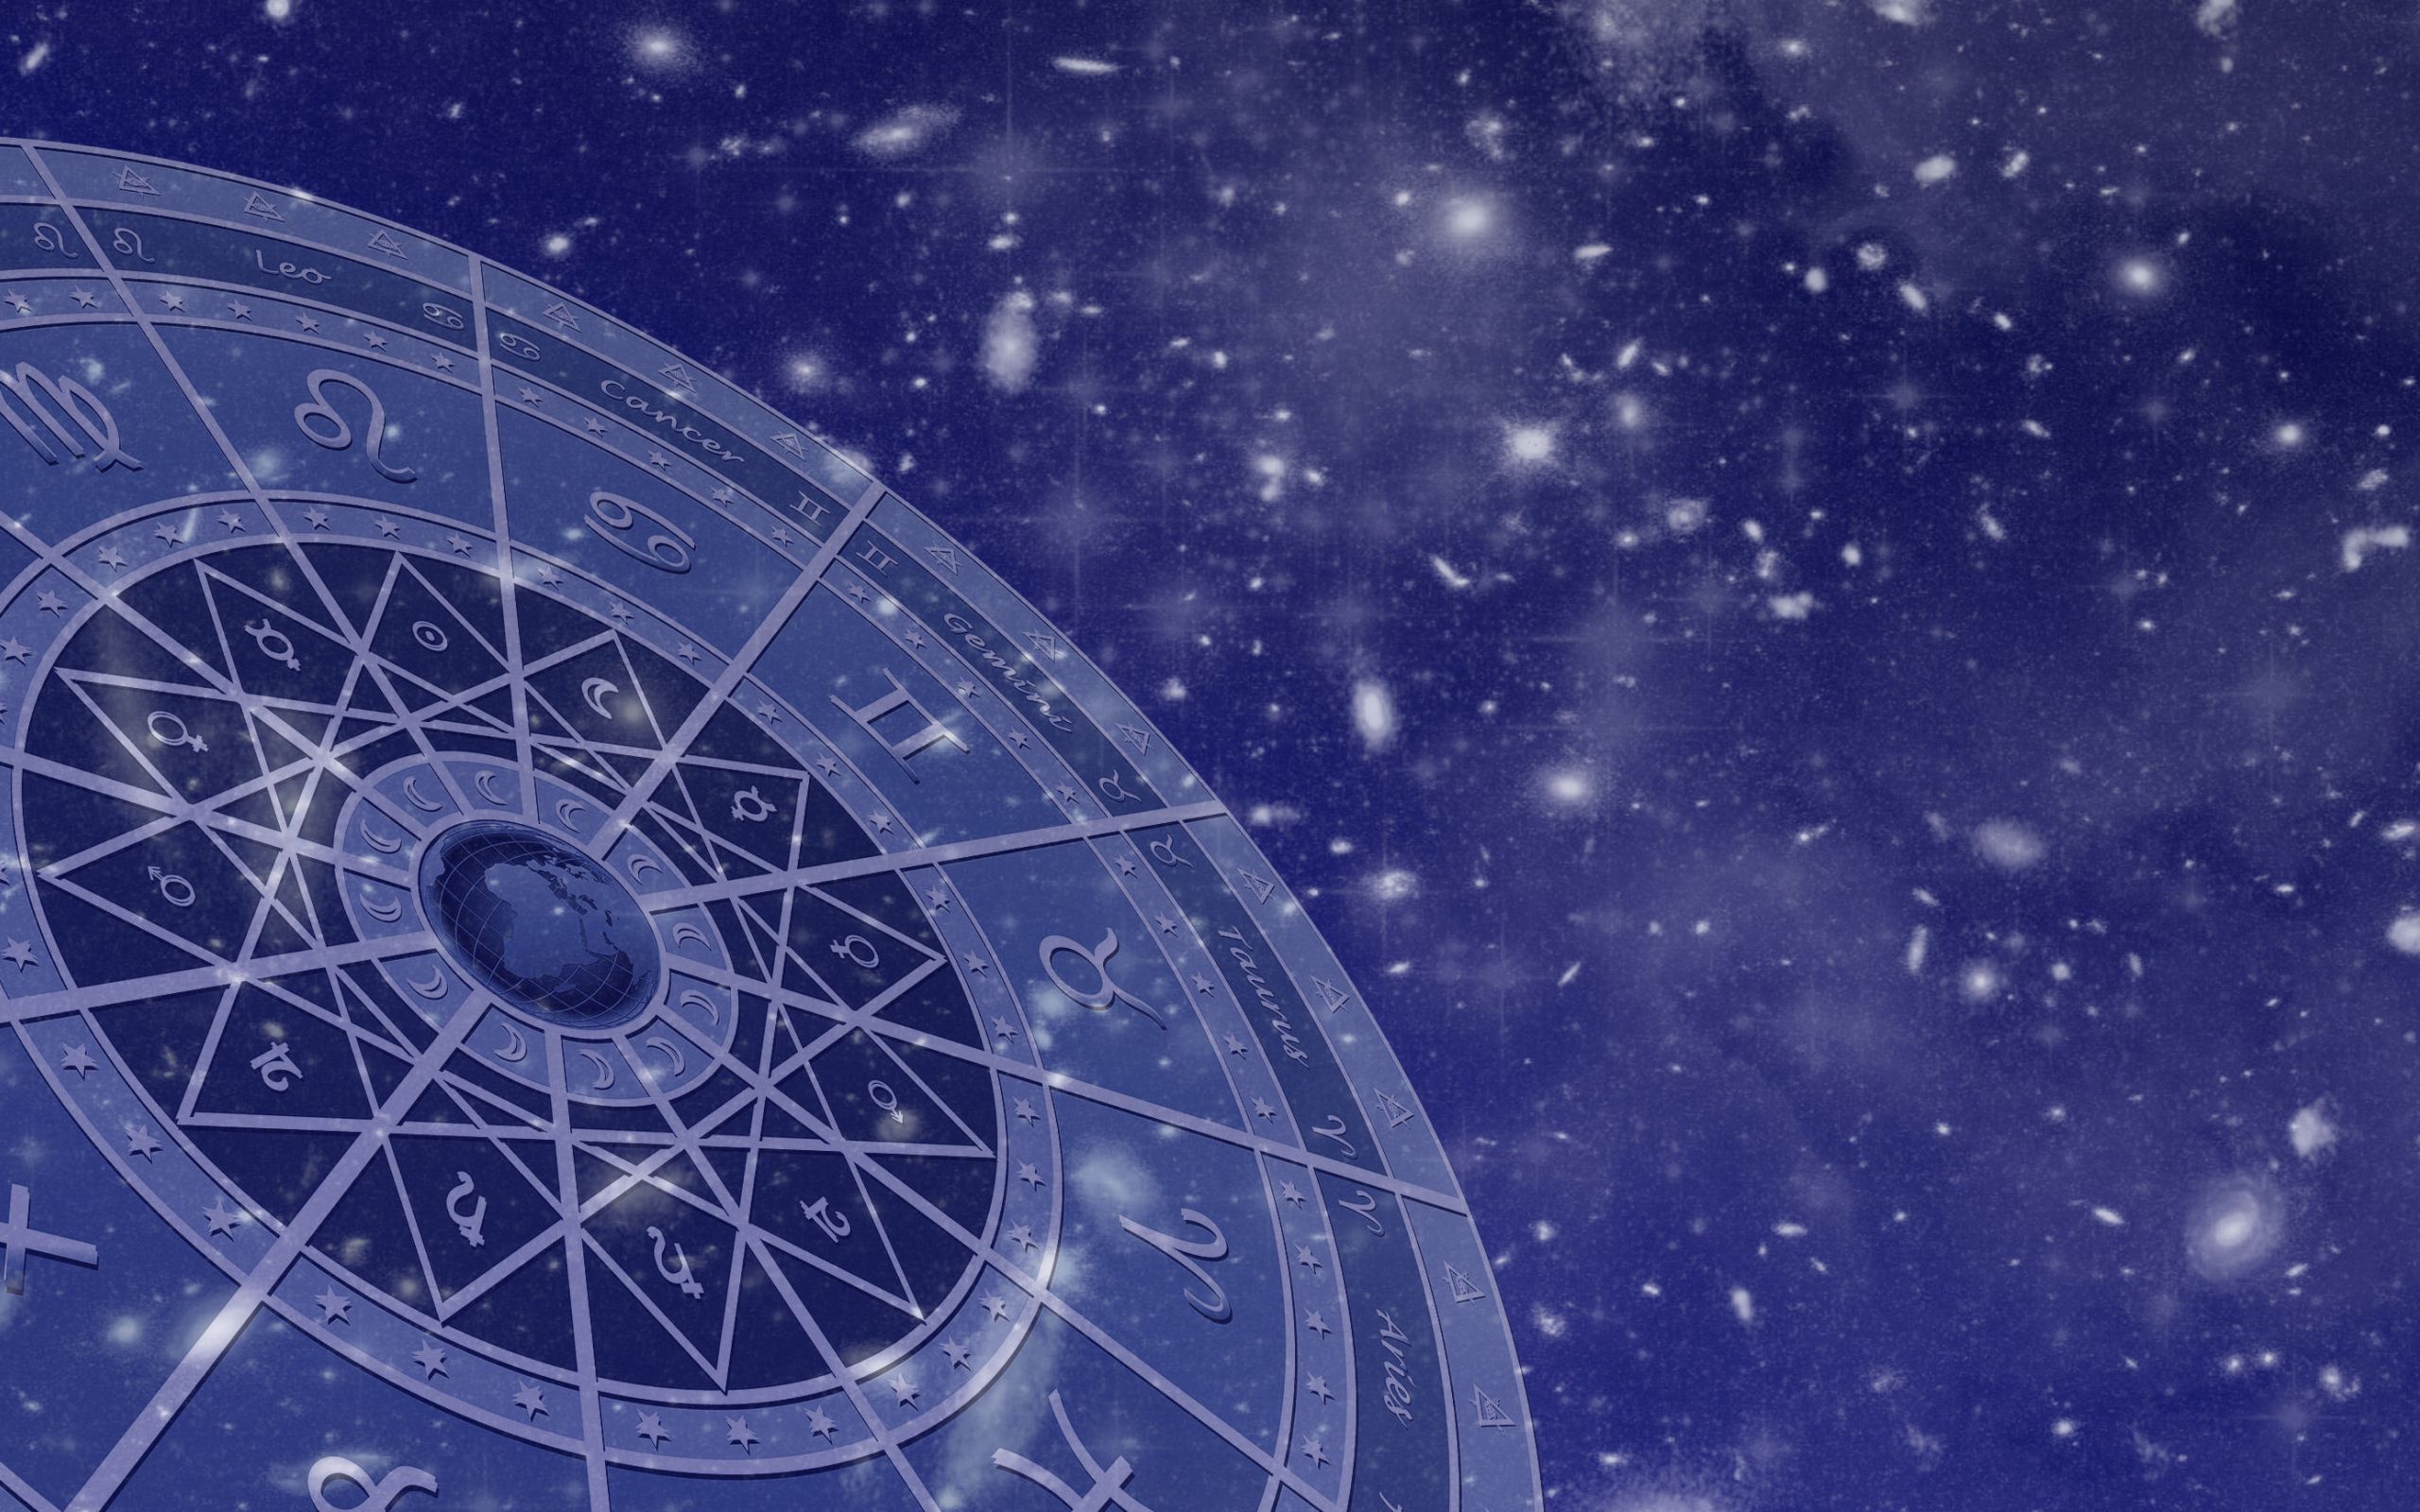 Signs of the zodiac on a blue background Desktop wallpaper 2560x1600